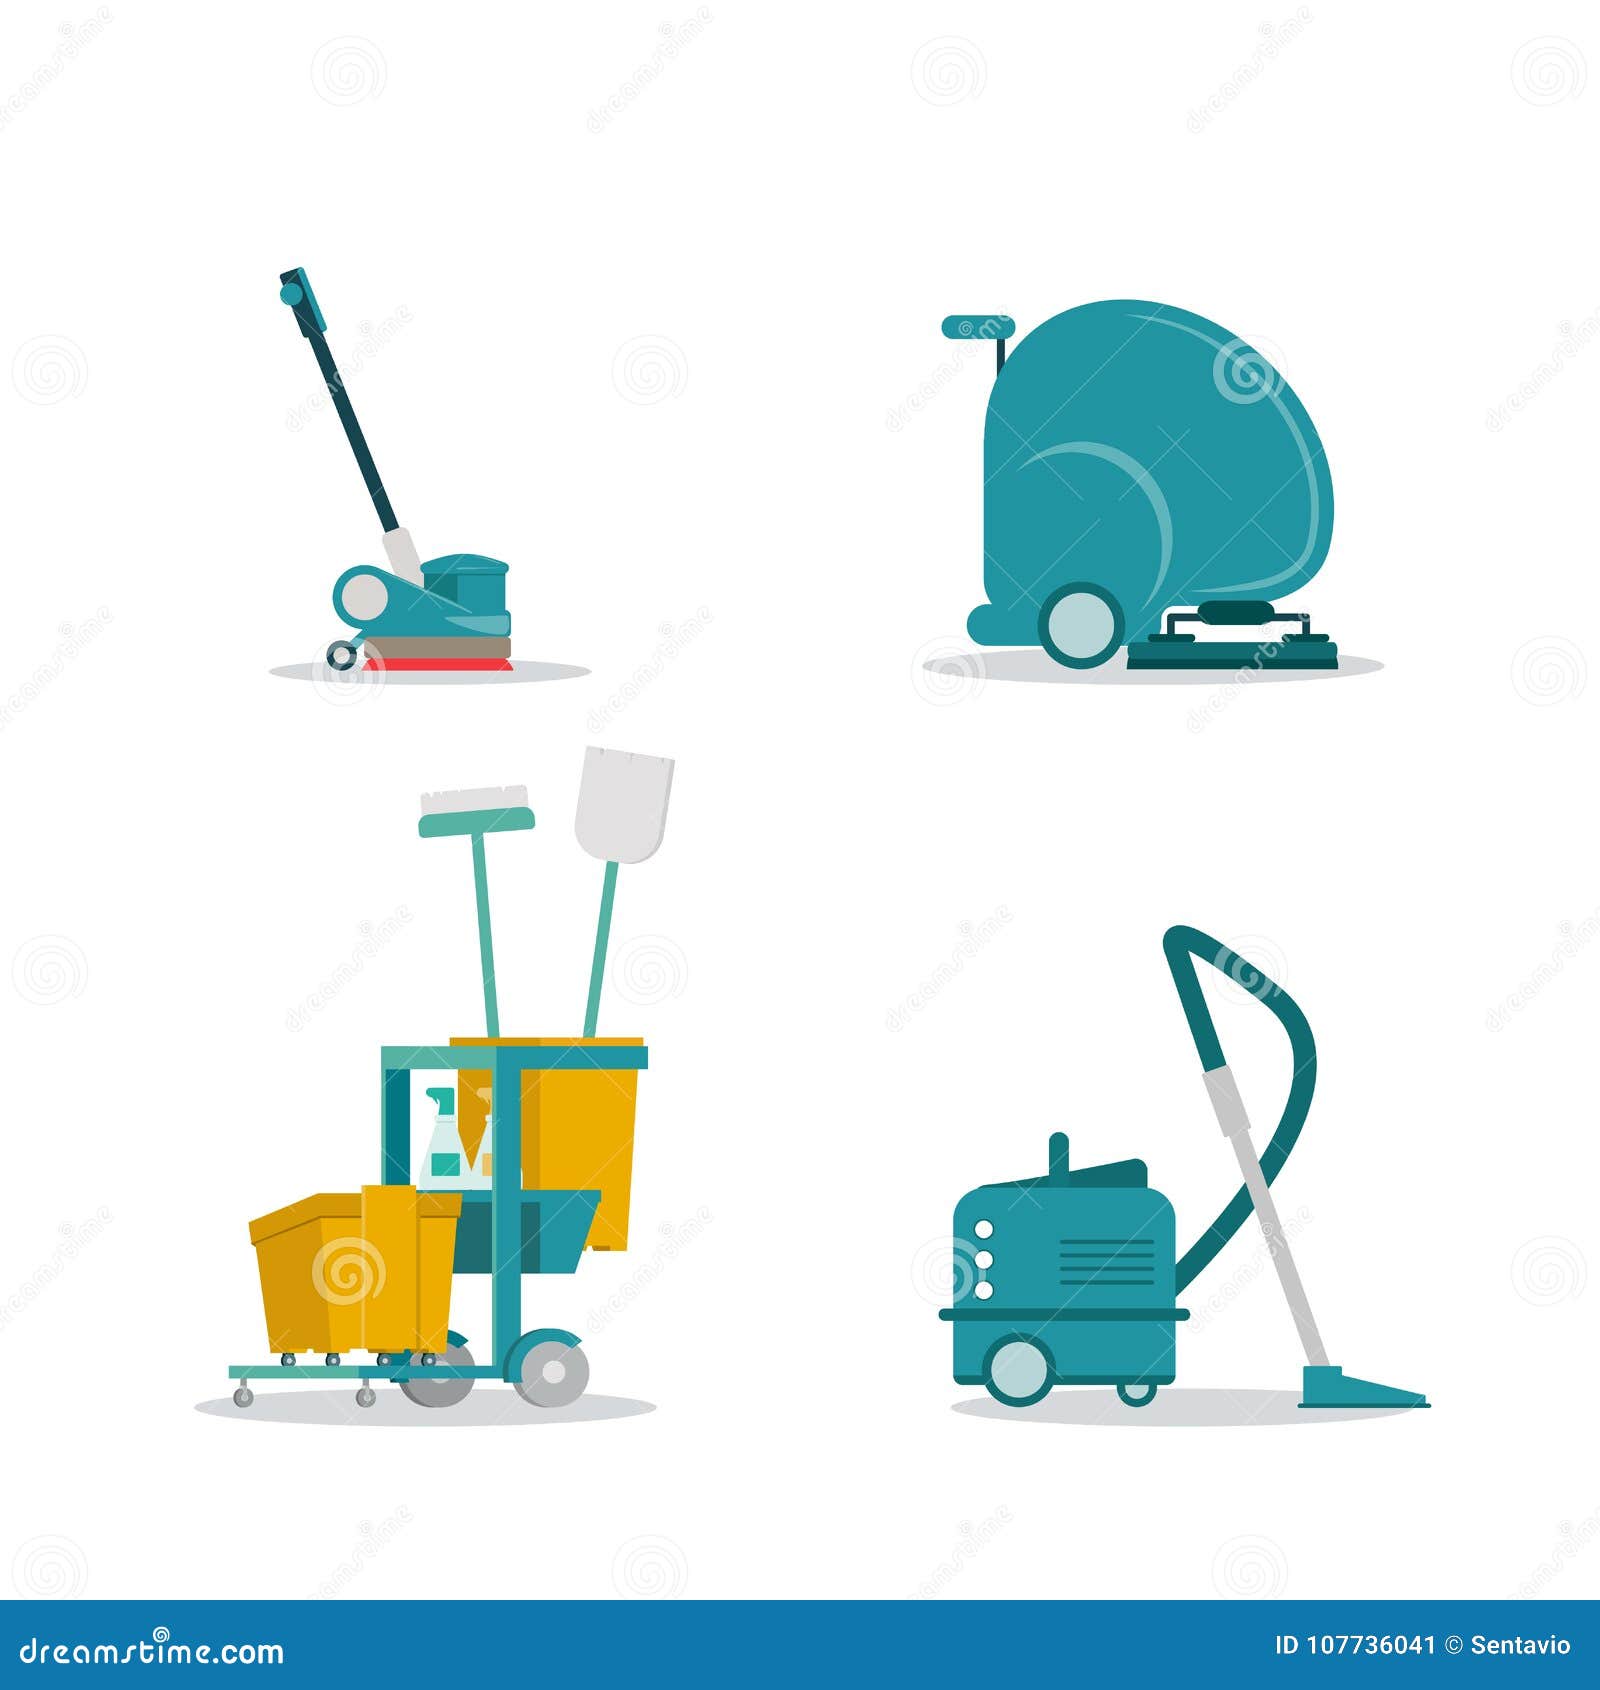 professional cleaning service tolls equipment flat